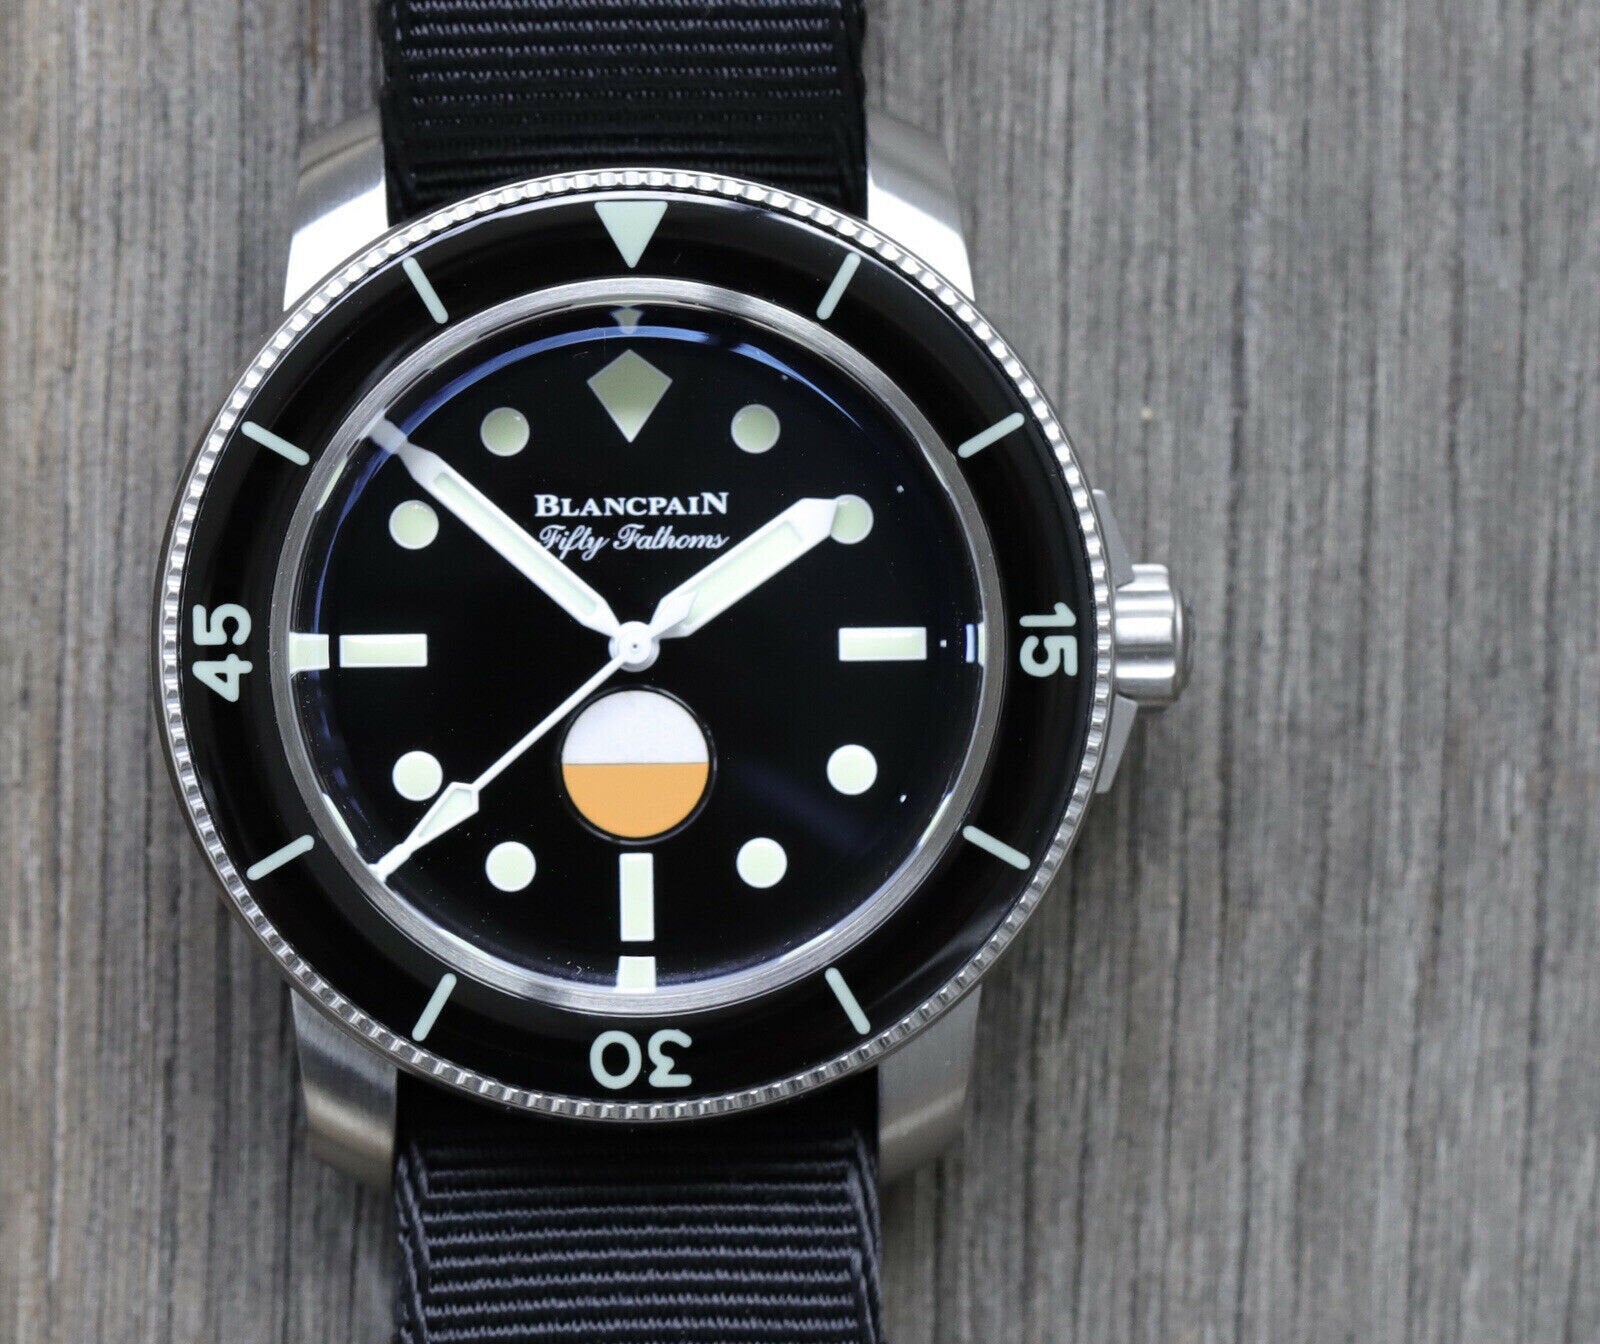 Blancpain_Fifty_Fathoms_Mil-Spec_5008_11B30_NABA_LE_for_HODINKEE_-_Brand_New_Watch_Vault_01.jpg